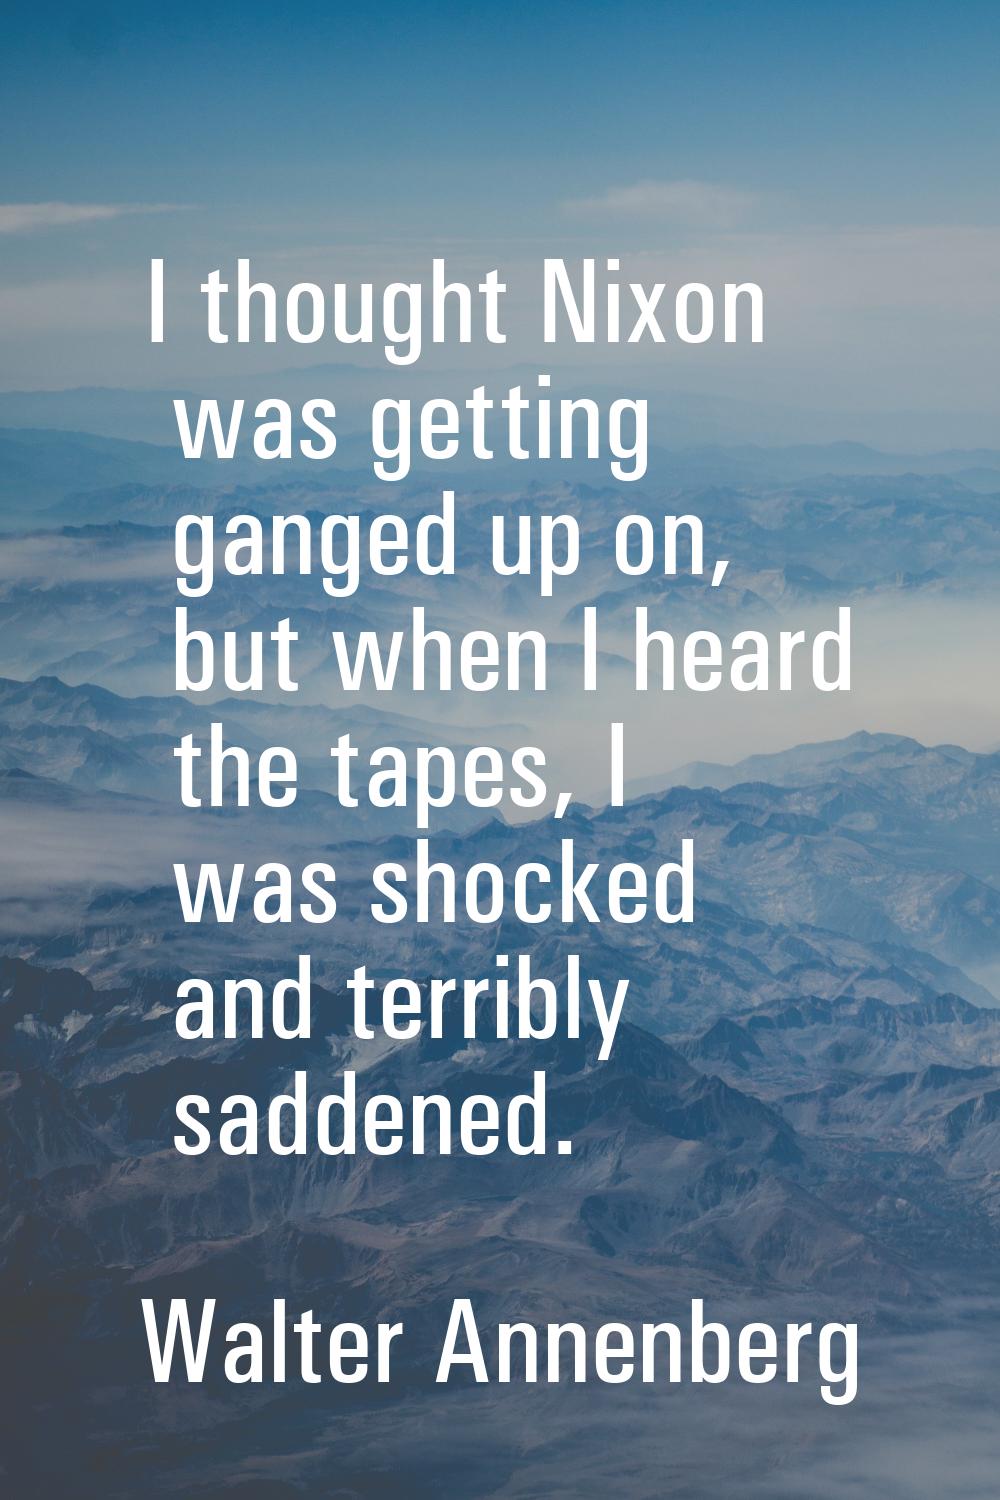 I thought Nixon was getting ganged up on, but when I heard the tapes, I was shocked and terribly sa